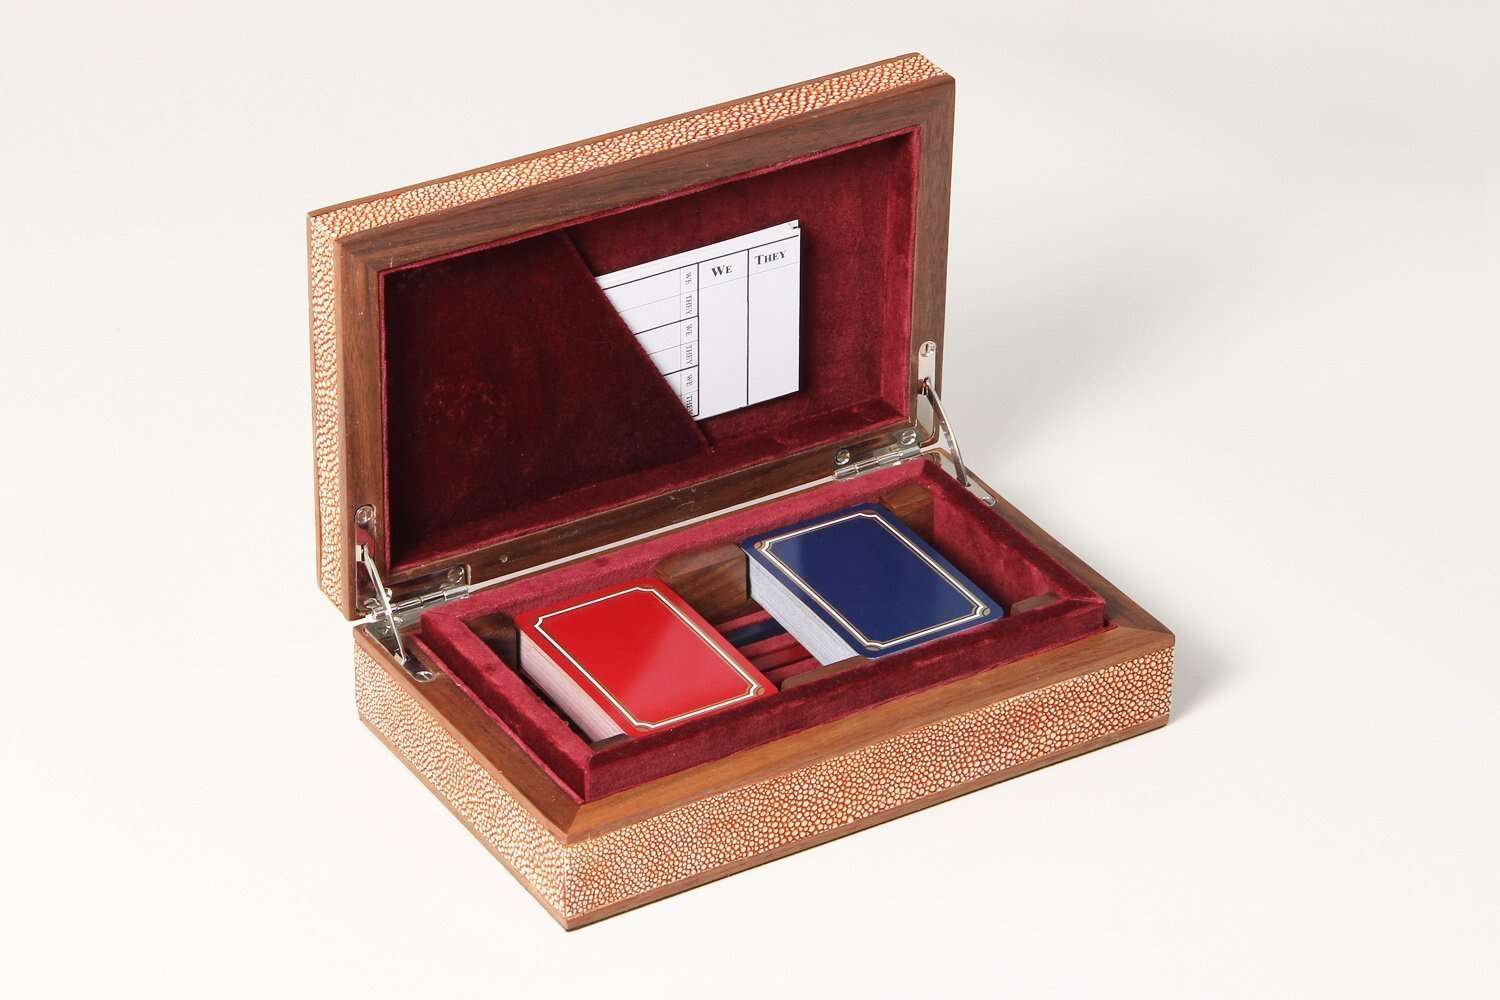 Coral shagreen bridge set Luxury gift present quality playing cards.